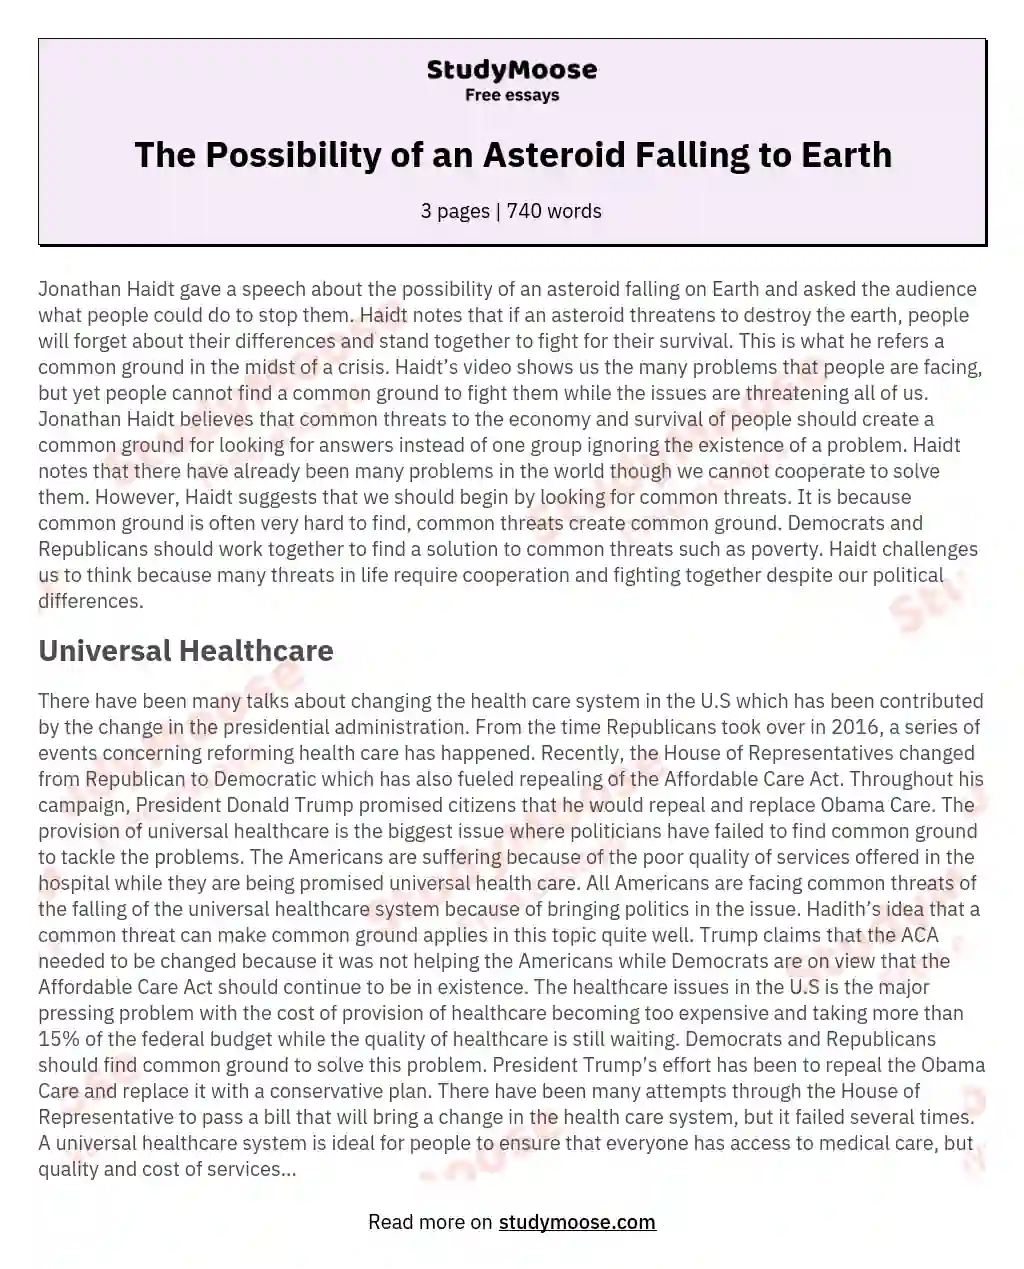 The Possibility of an Asteroid Falling to Earth essay